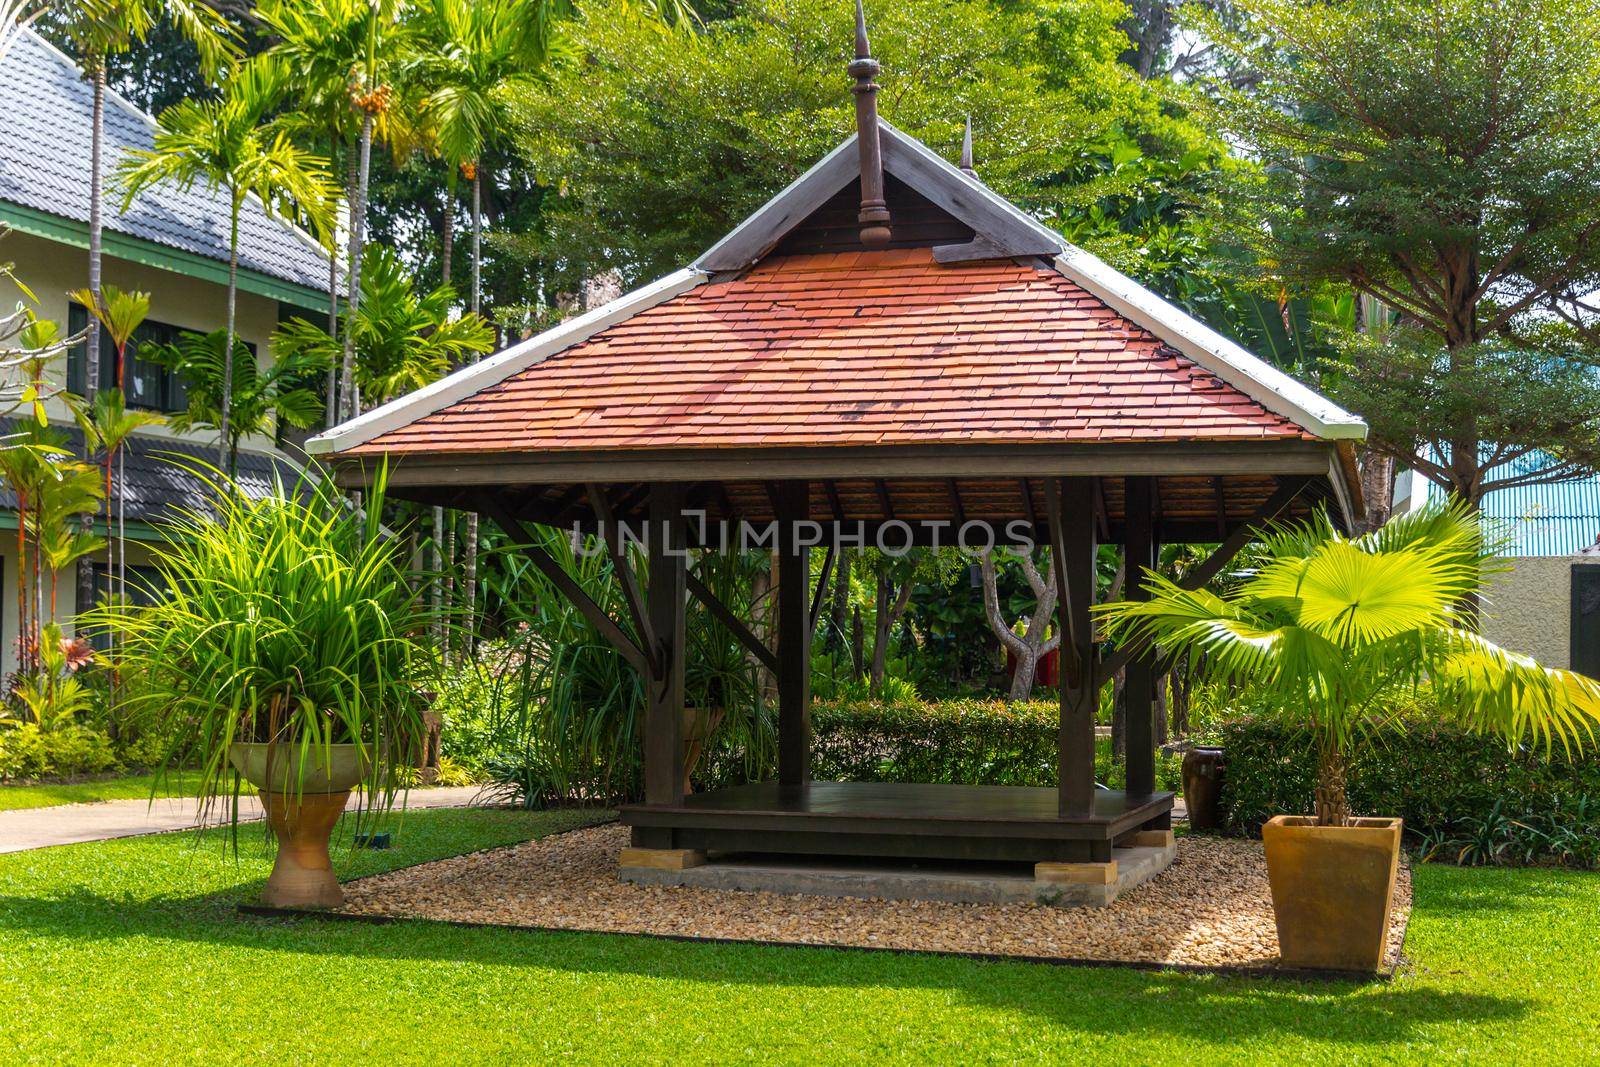 beautiful wooden gazebo in tropical nature in Thailand by Mariakray